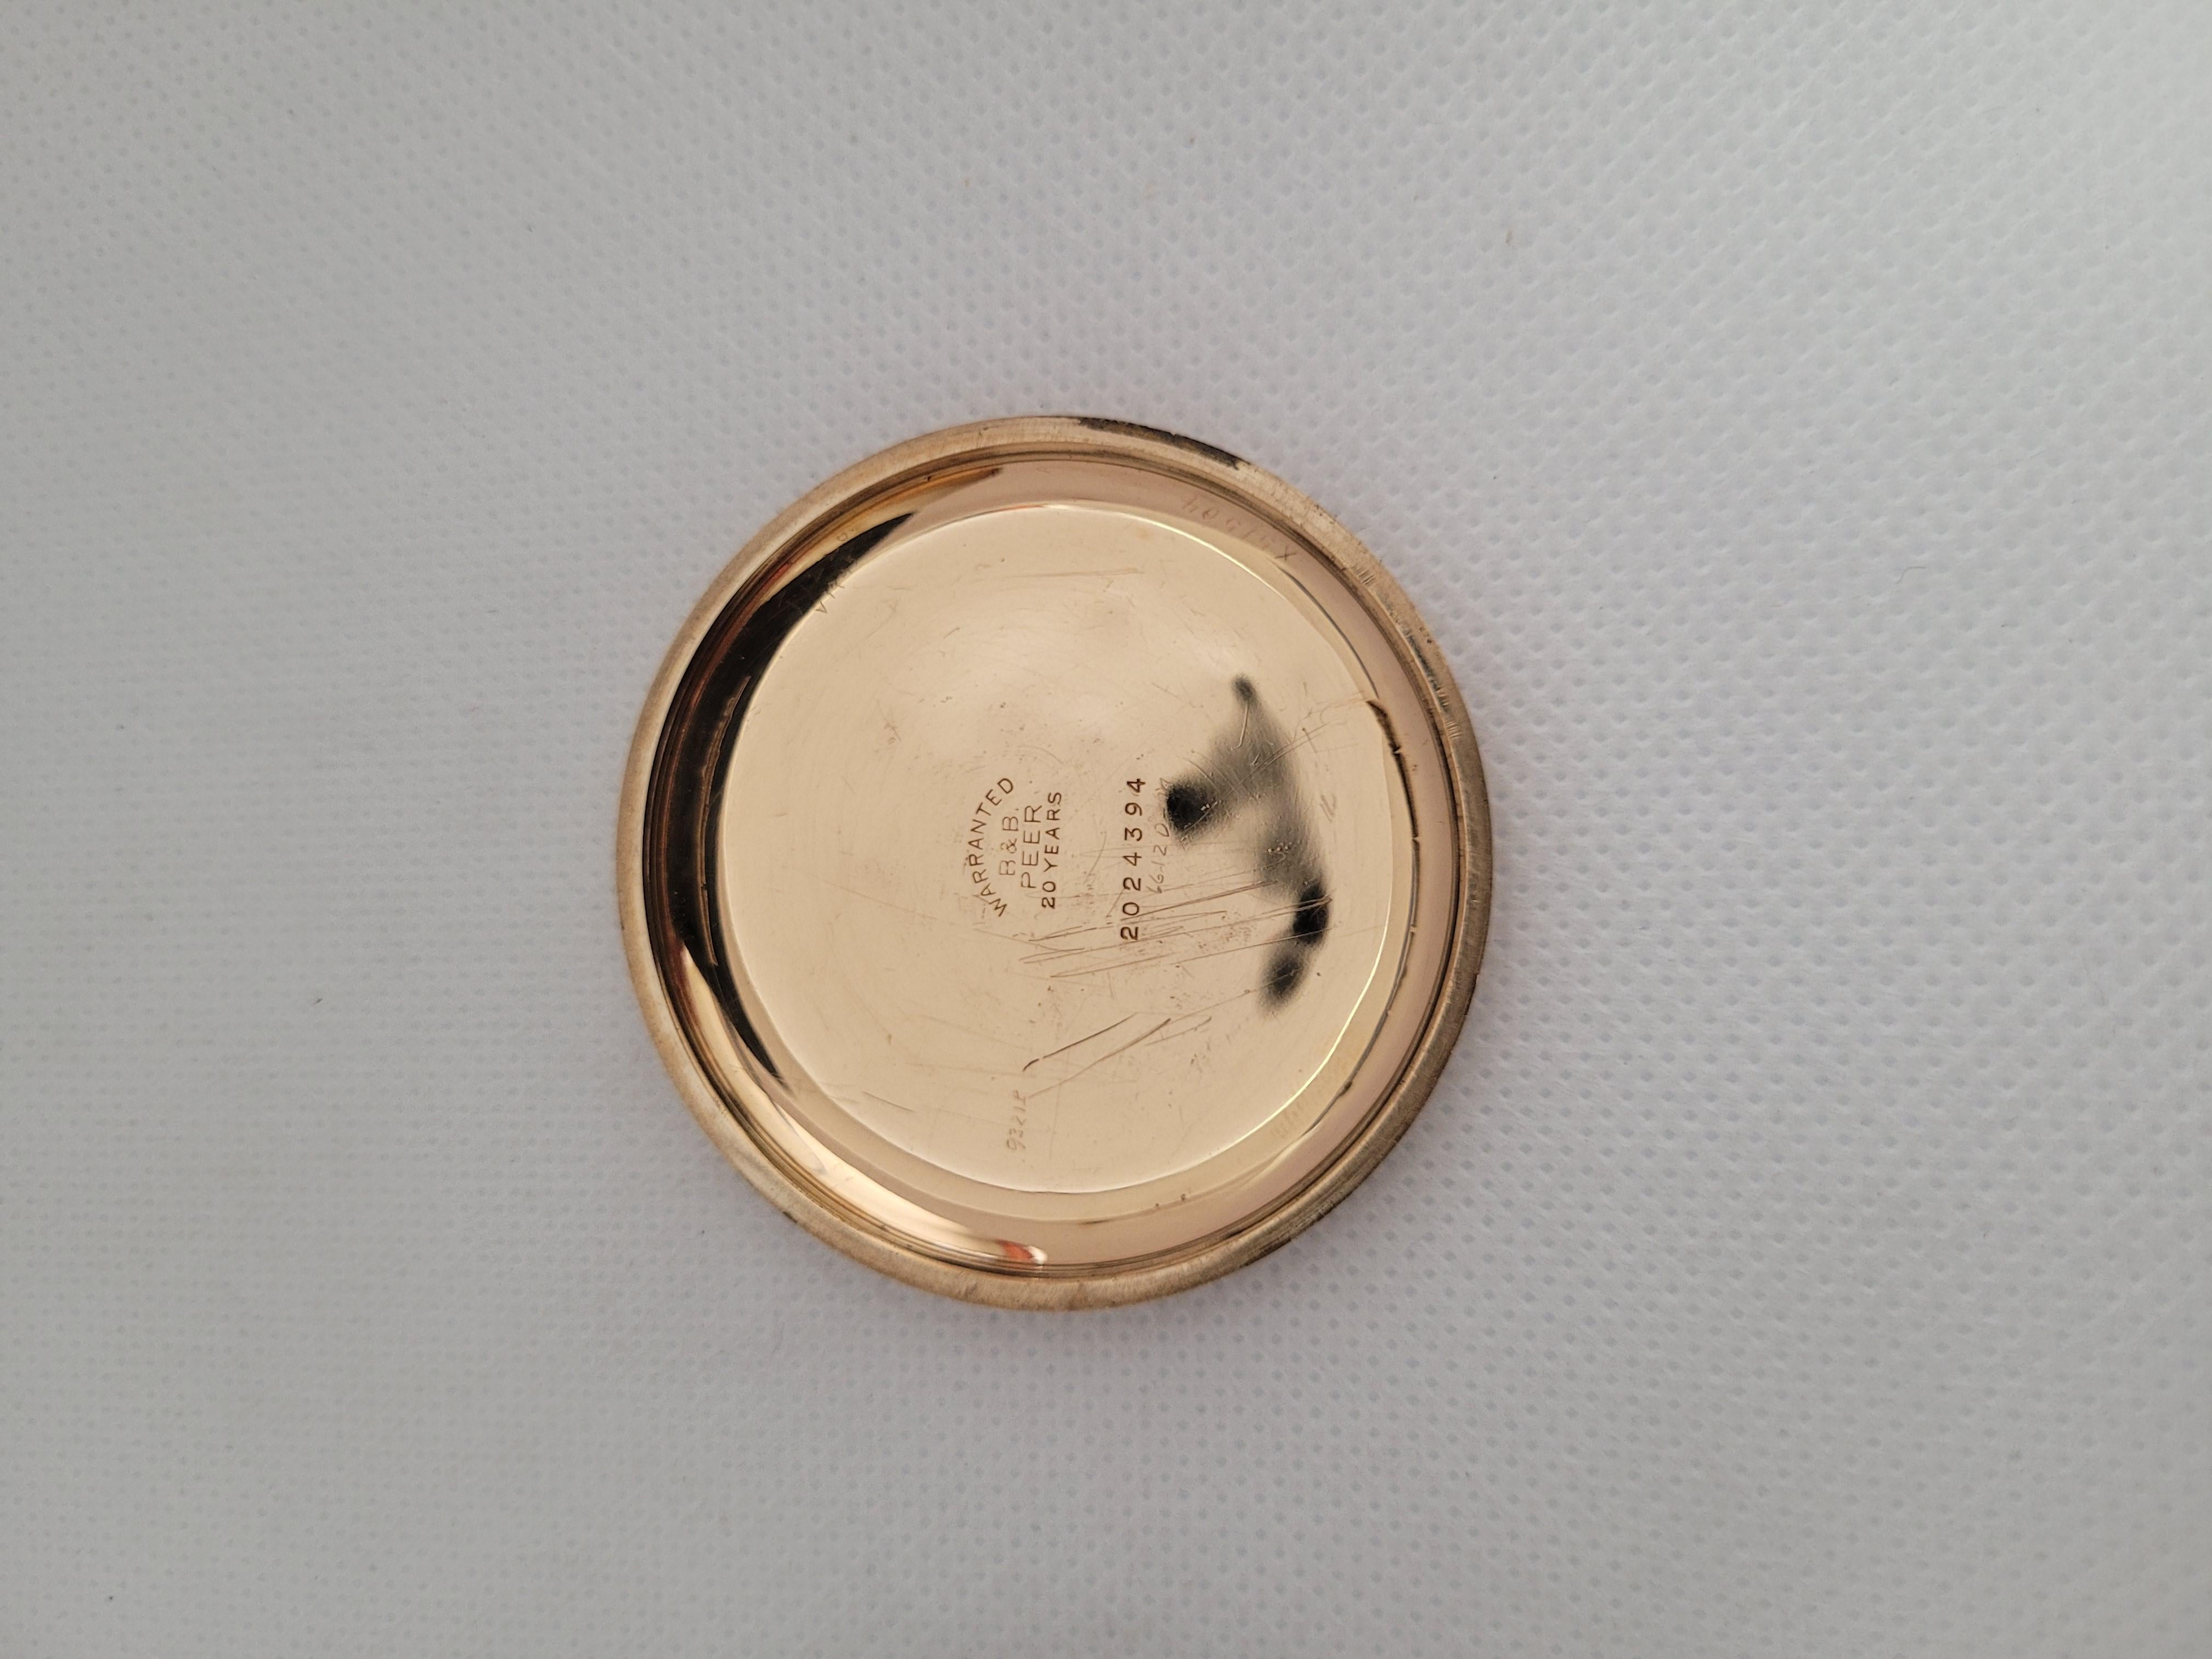 Waltham pocket watch gold plated, the year 1908. The case is in very good condition with minor wear; 50mm in diameter and 13mm thick. The case has a very clean glass crystal with a white face. The movement is in working condition, 7 jewels, and